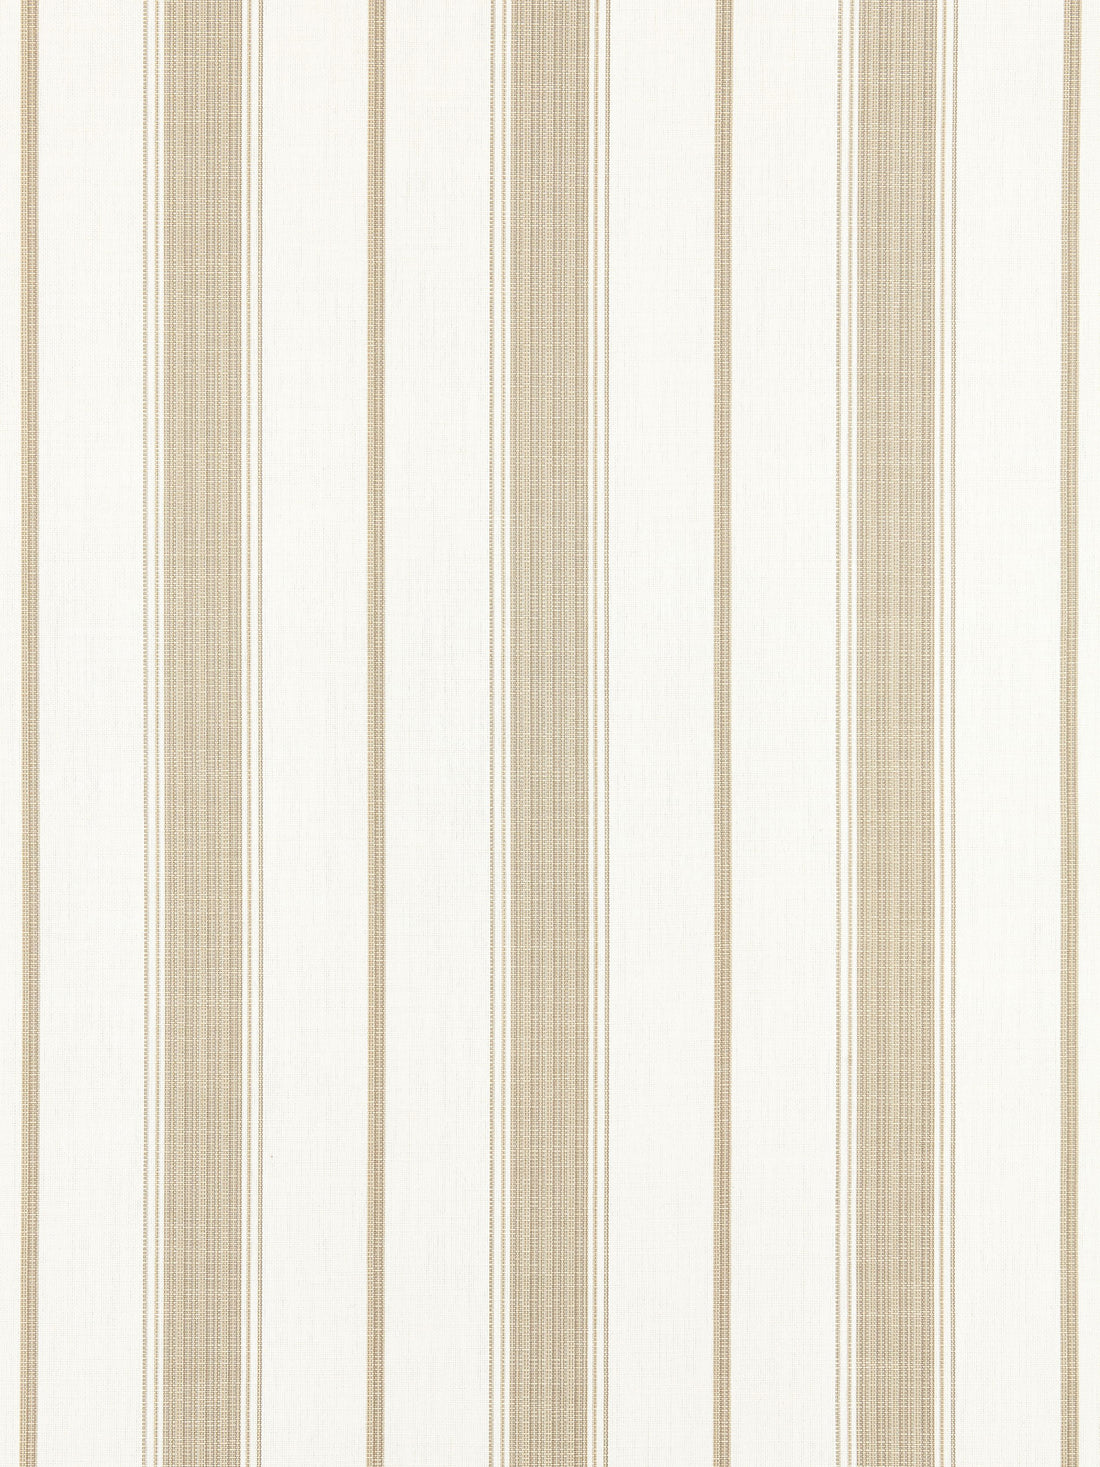 Sconset Stripe fabric in linen color - pattern number SC 000127110 - by Scalamandre in the Scalamandre Fabrics Book 1 collection